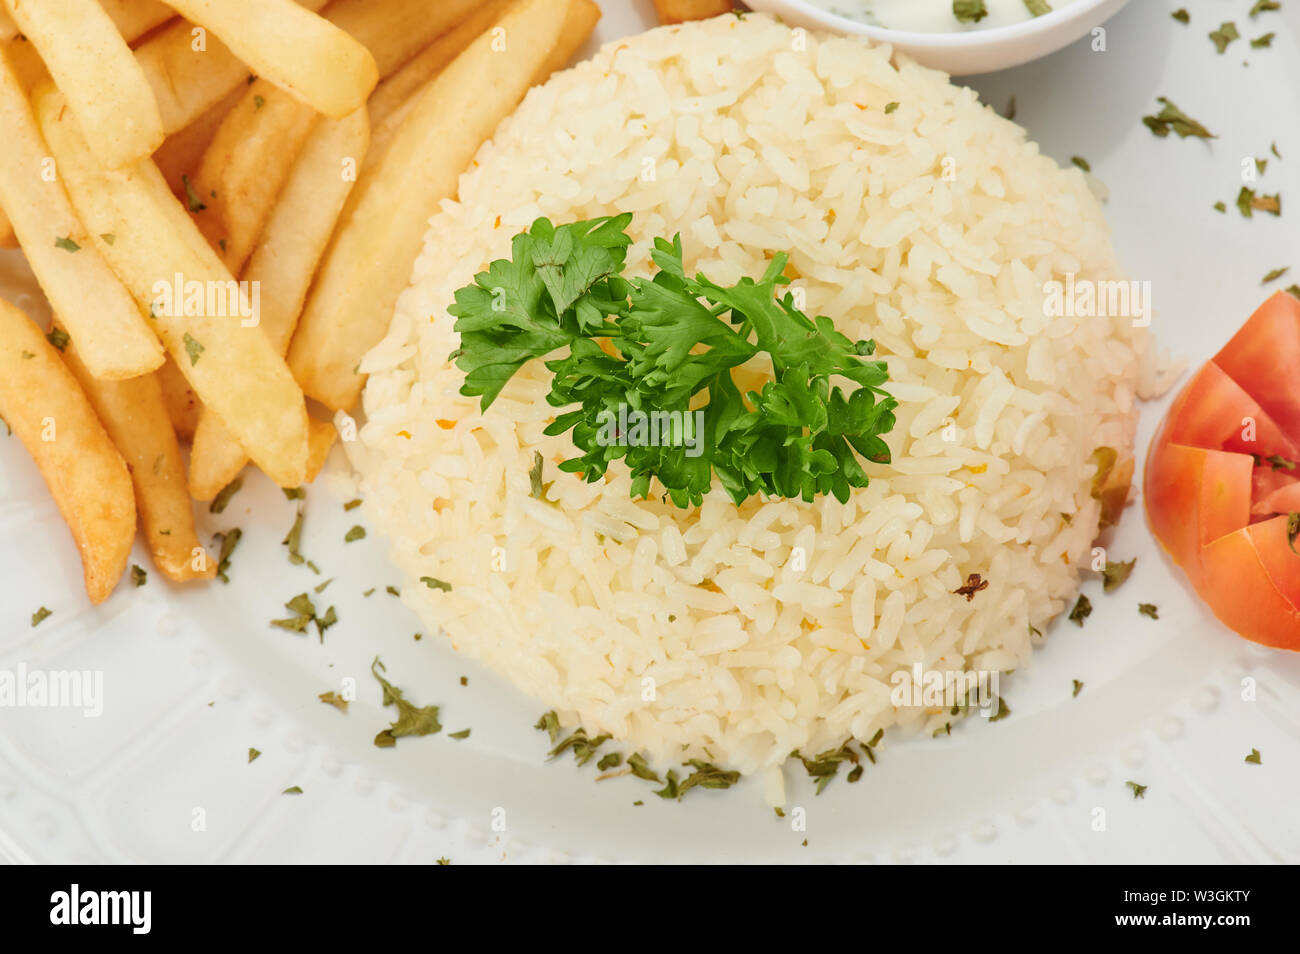 Pile of cooked rice with french fries close up view Stock Photo